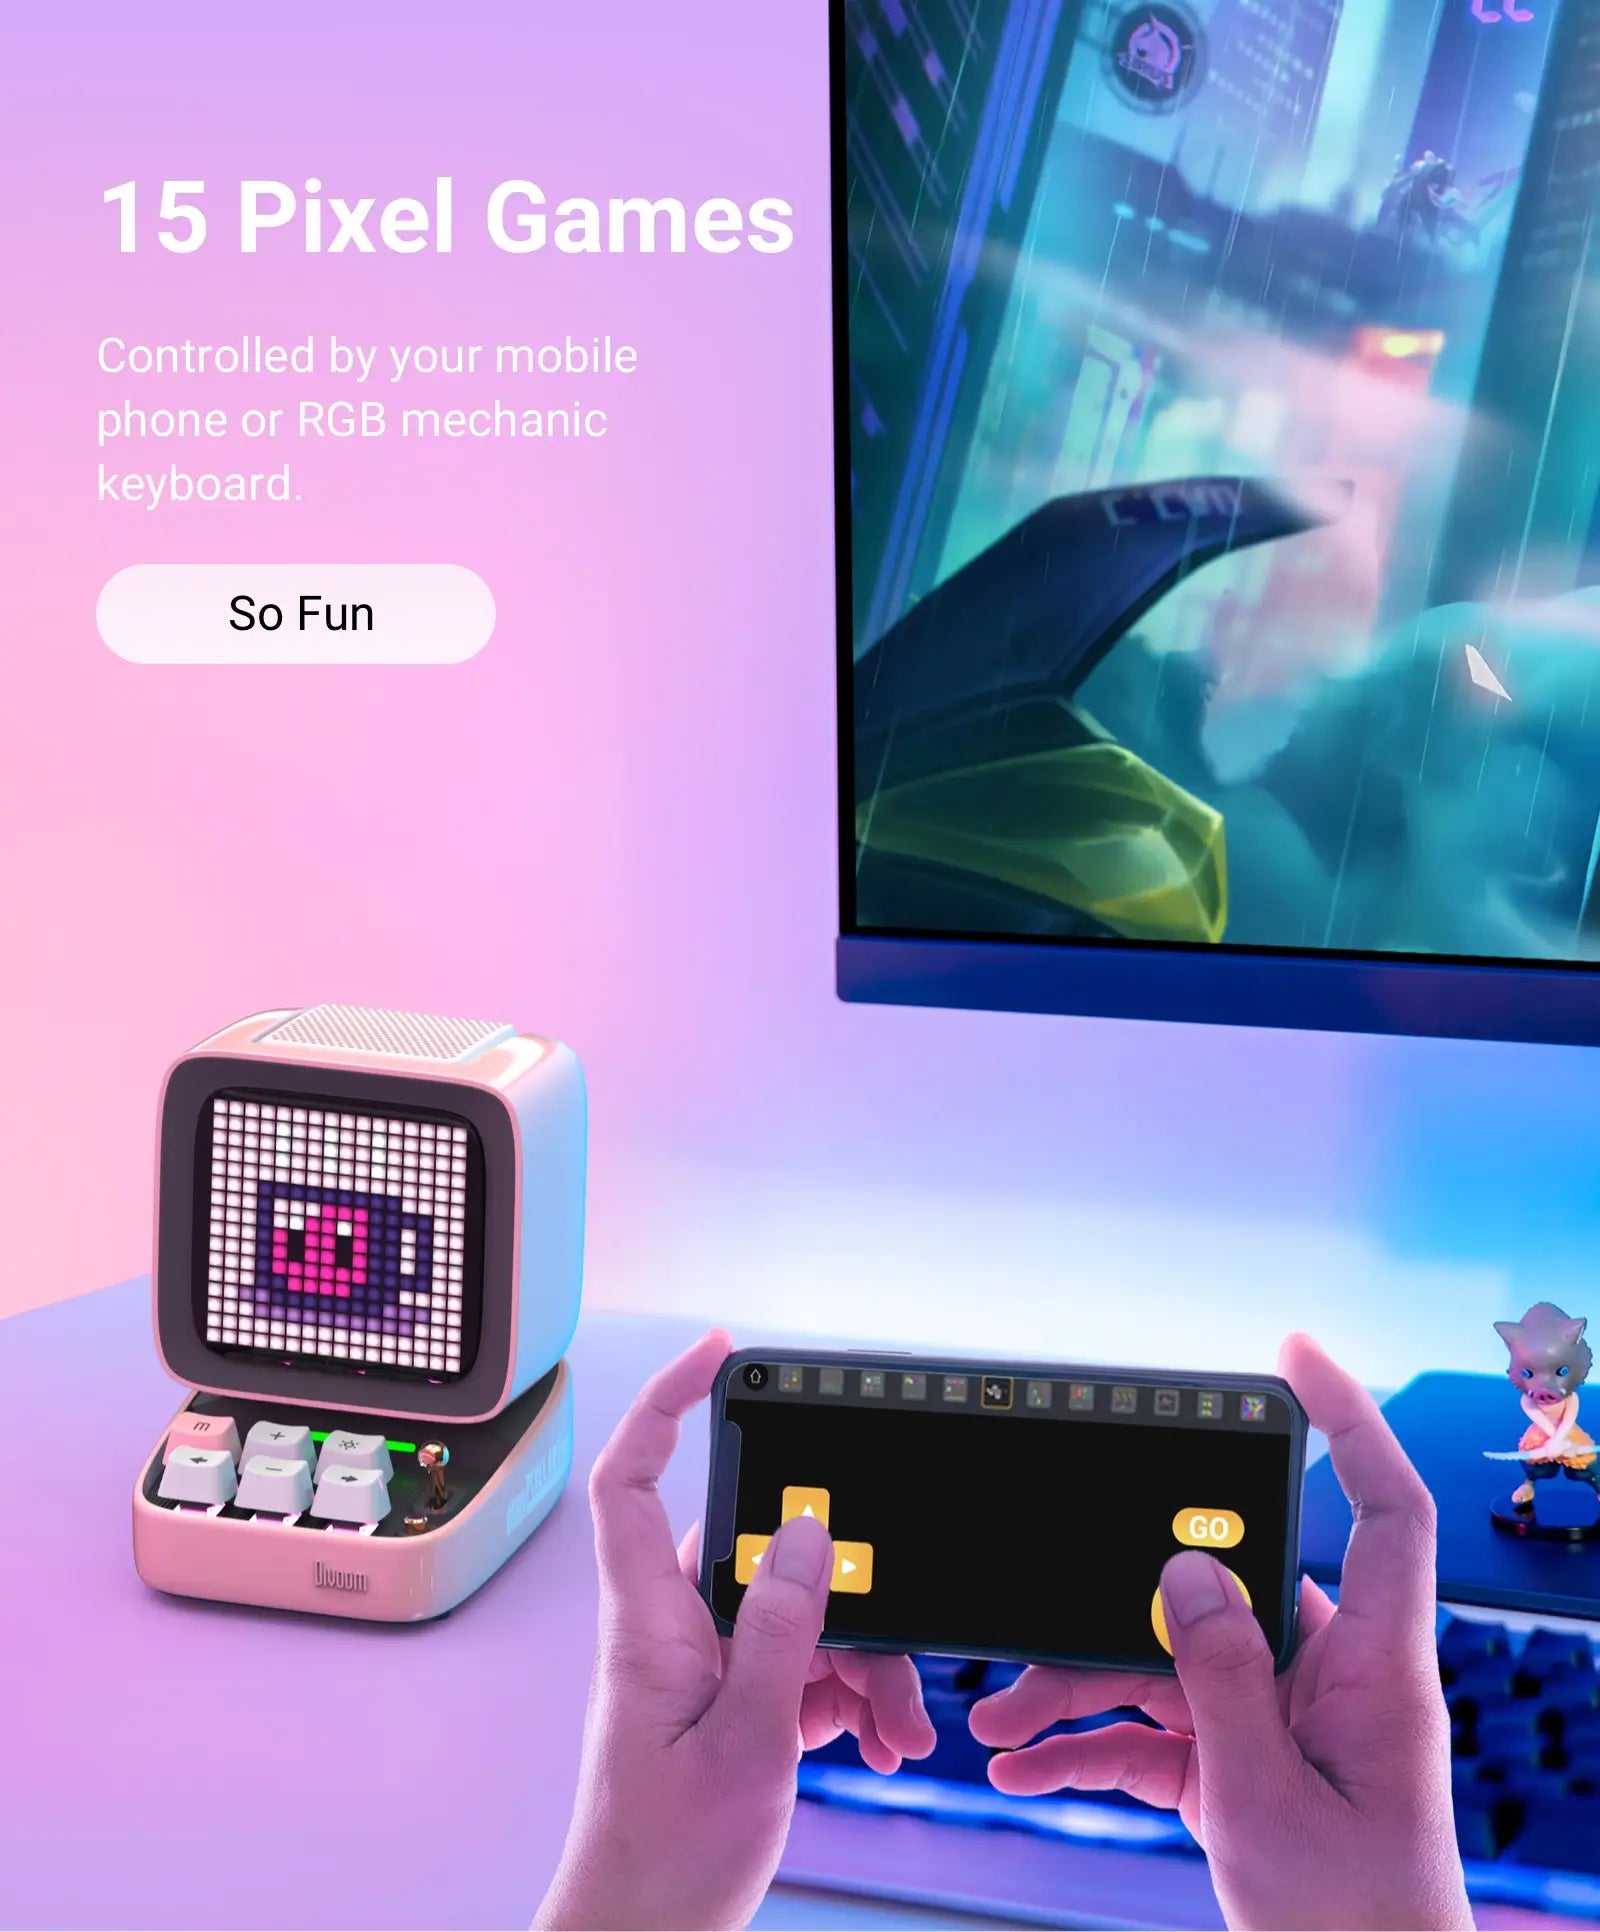 - So Fun | Classic Pixel Games Play 15 Types of Pixel Games Freely Controlled by your mobile phone or RGB mechanic keyboard.